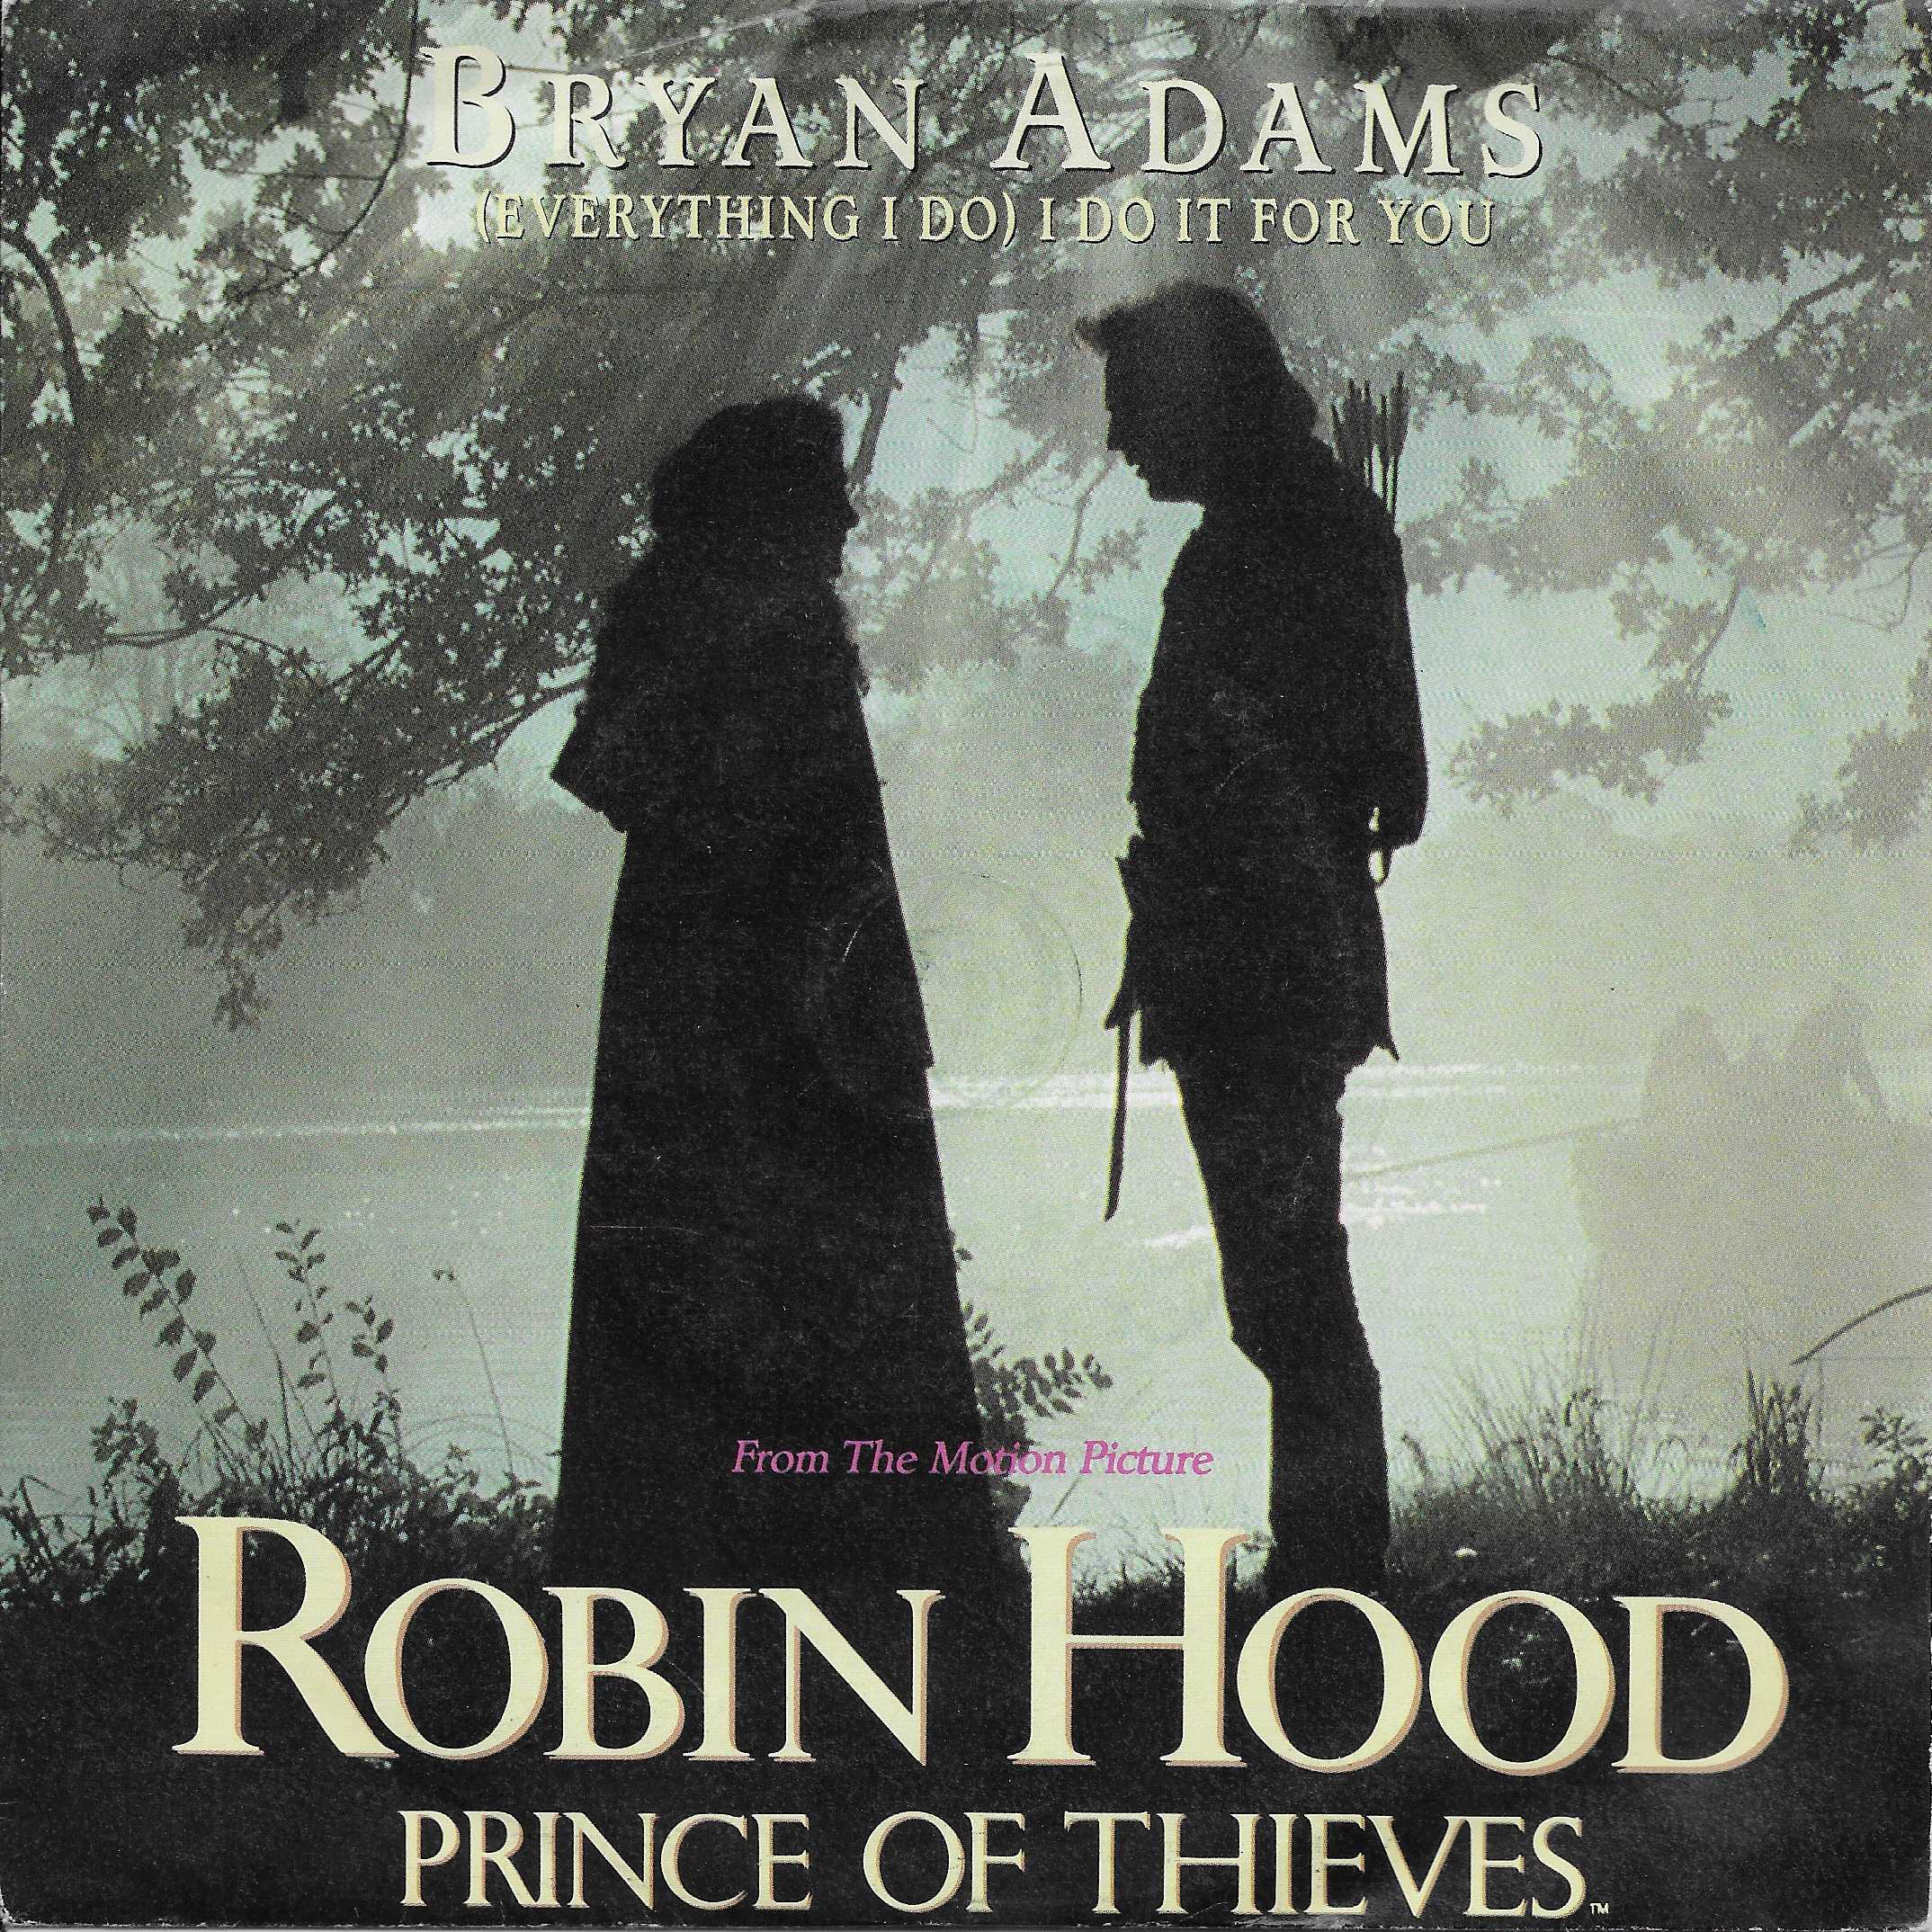 Picture of (Everything I do) I do it for you (Robin Hood: Prince of theives) by artist Brian Admas / R. J. Lange / Michael Kamen / J. Valance from ITV, Channel 4 and Channel 5 singles library